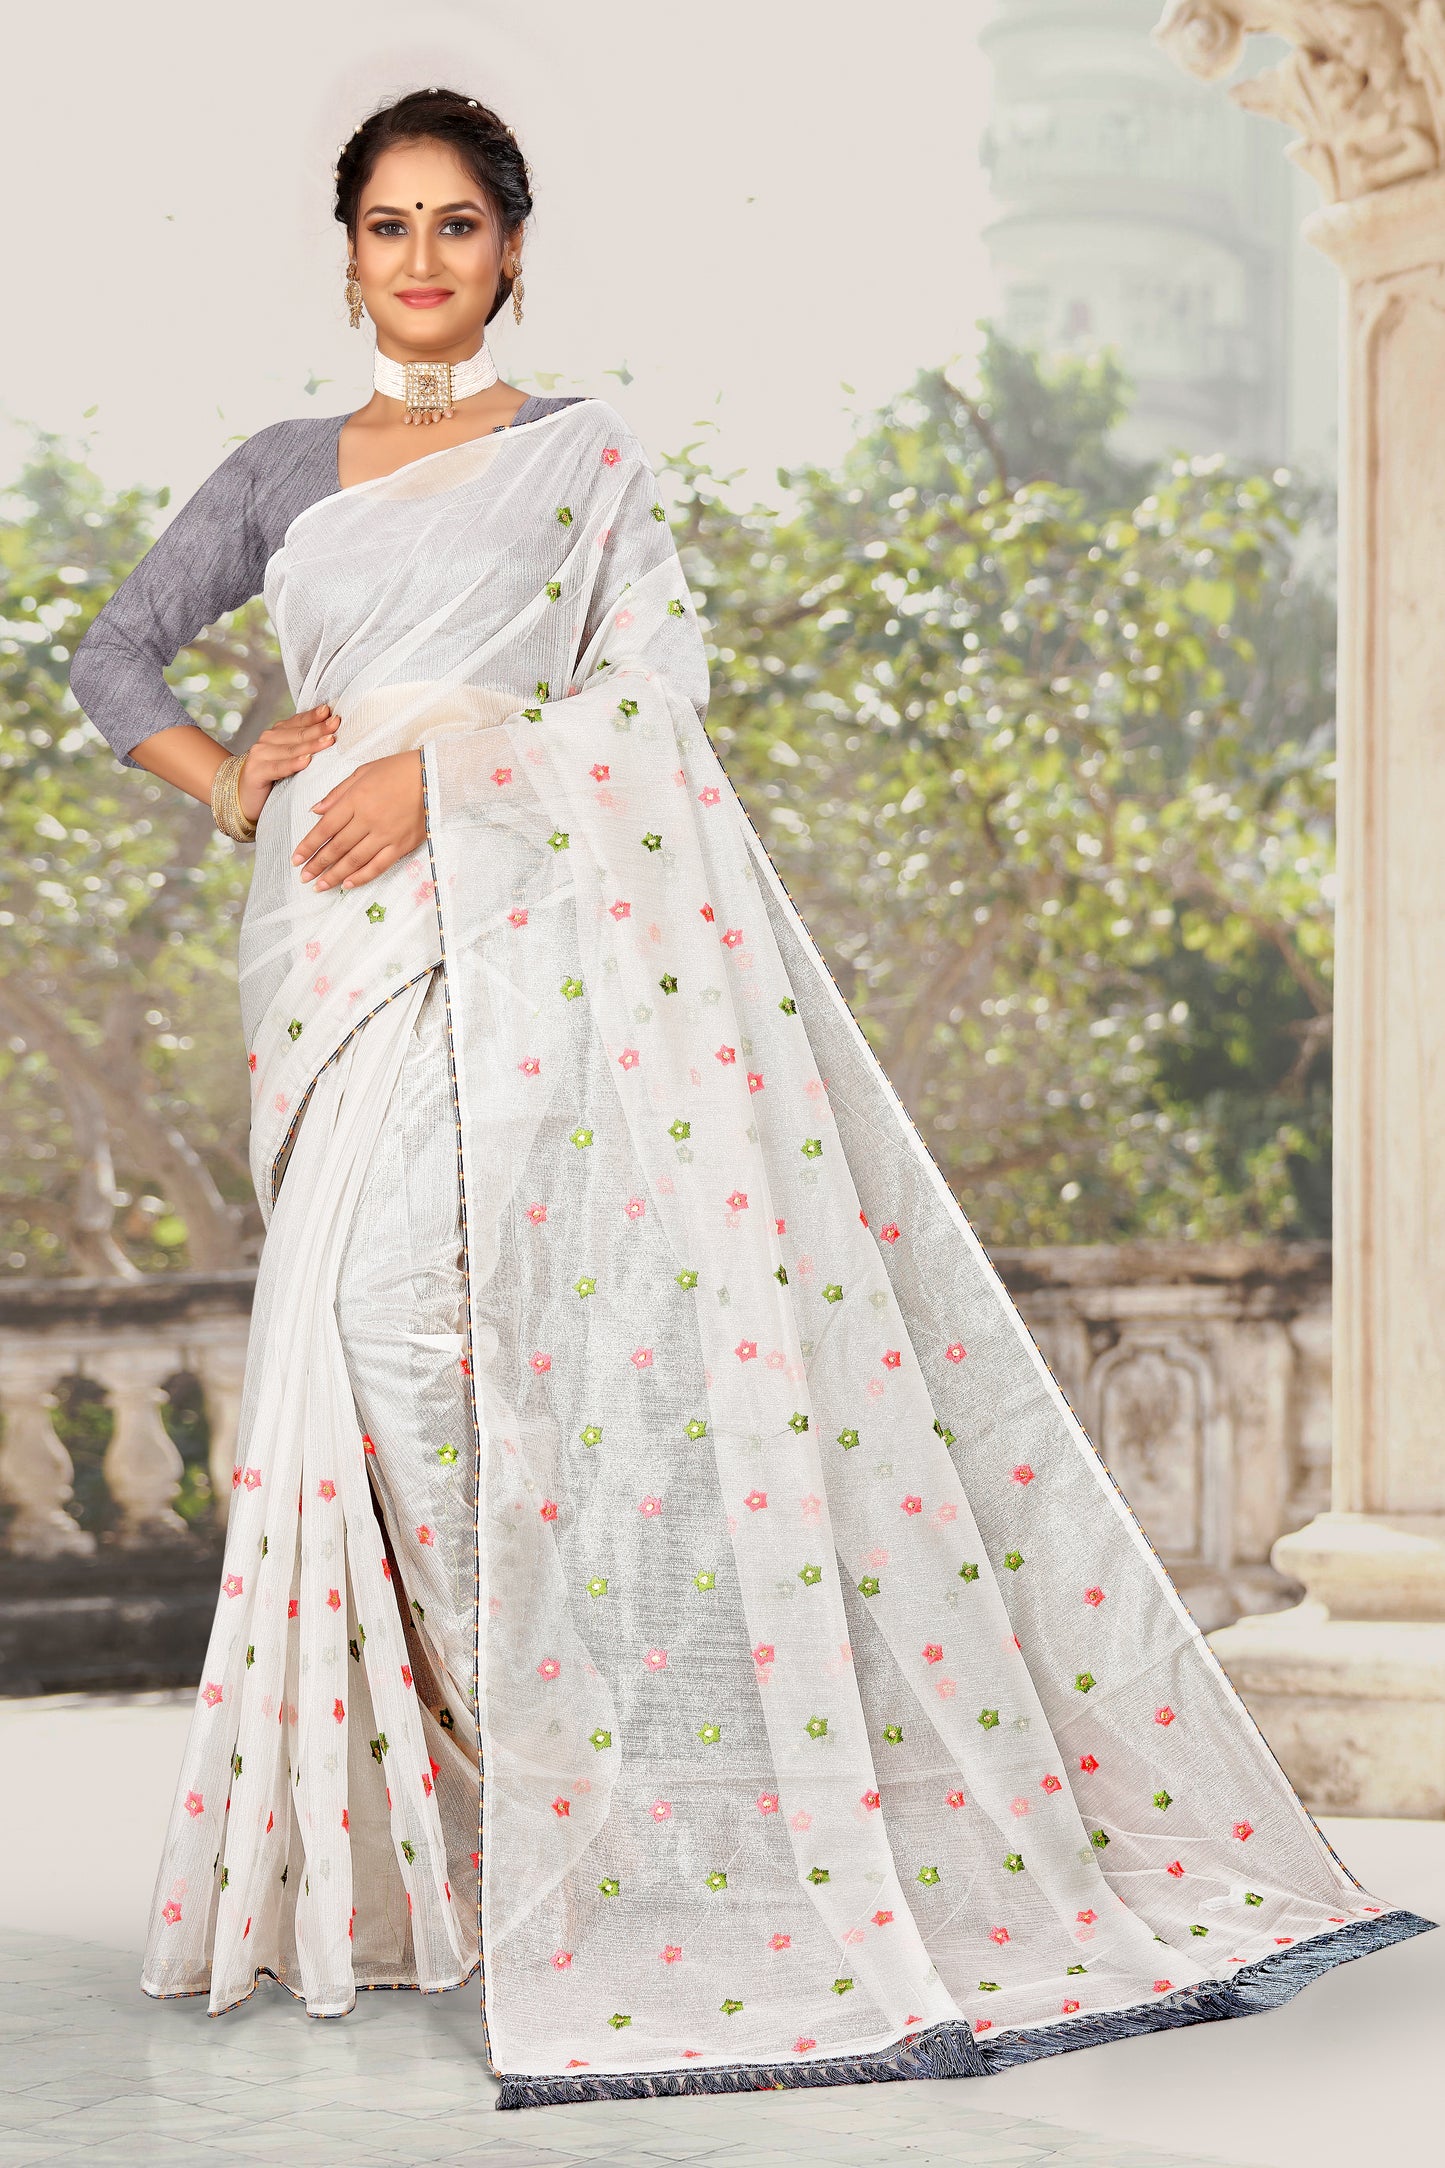 OFFICIAL ORGANZA COTTON WITH WORK IN WHOLE SAREE FOR ALL FORMAL OCCASIONS IN WHITE PURITY